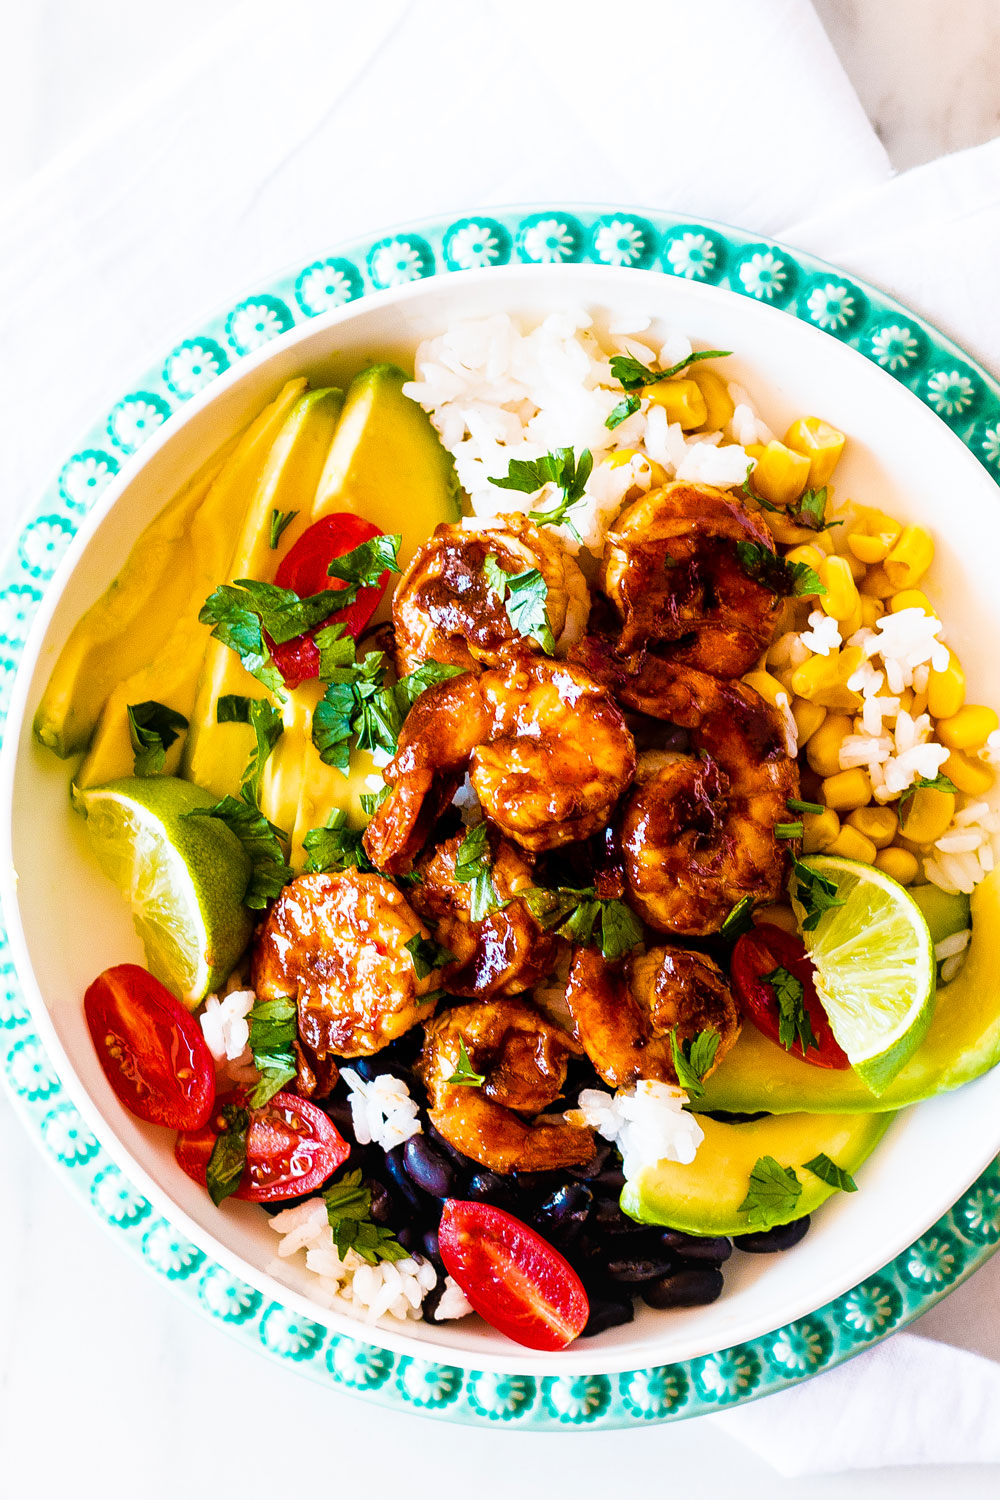 These Adobo Shrimp Bowls are loaded with flavorful and juicy shrimp, rice, black beans, tomatoes, avocados, and corn, then drizzled with a fresh cilantro lime dressing! https://www.spotebi.com/recipes/adobo-shrimp-bowls-cilantro-lime-dressing/